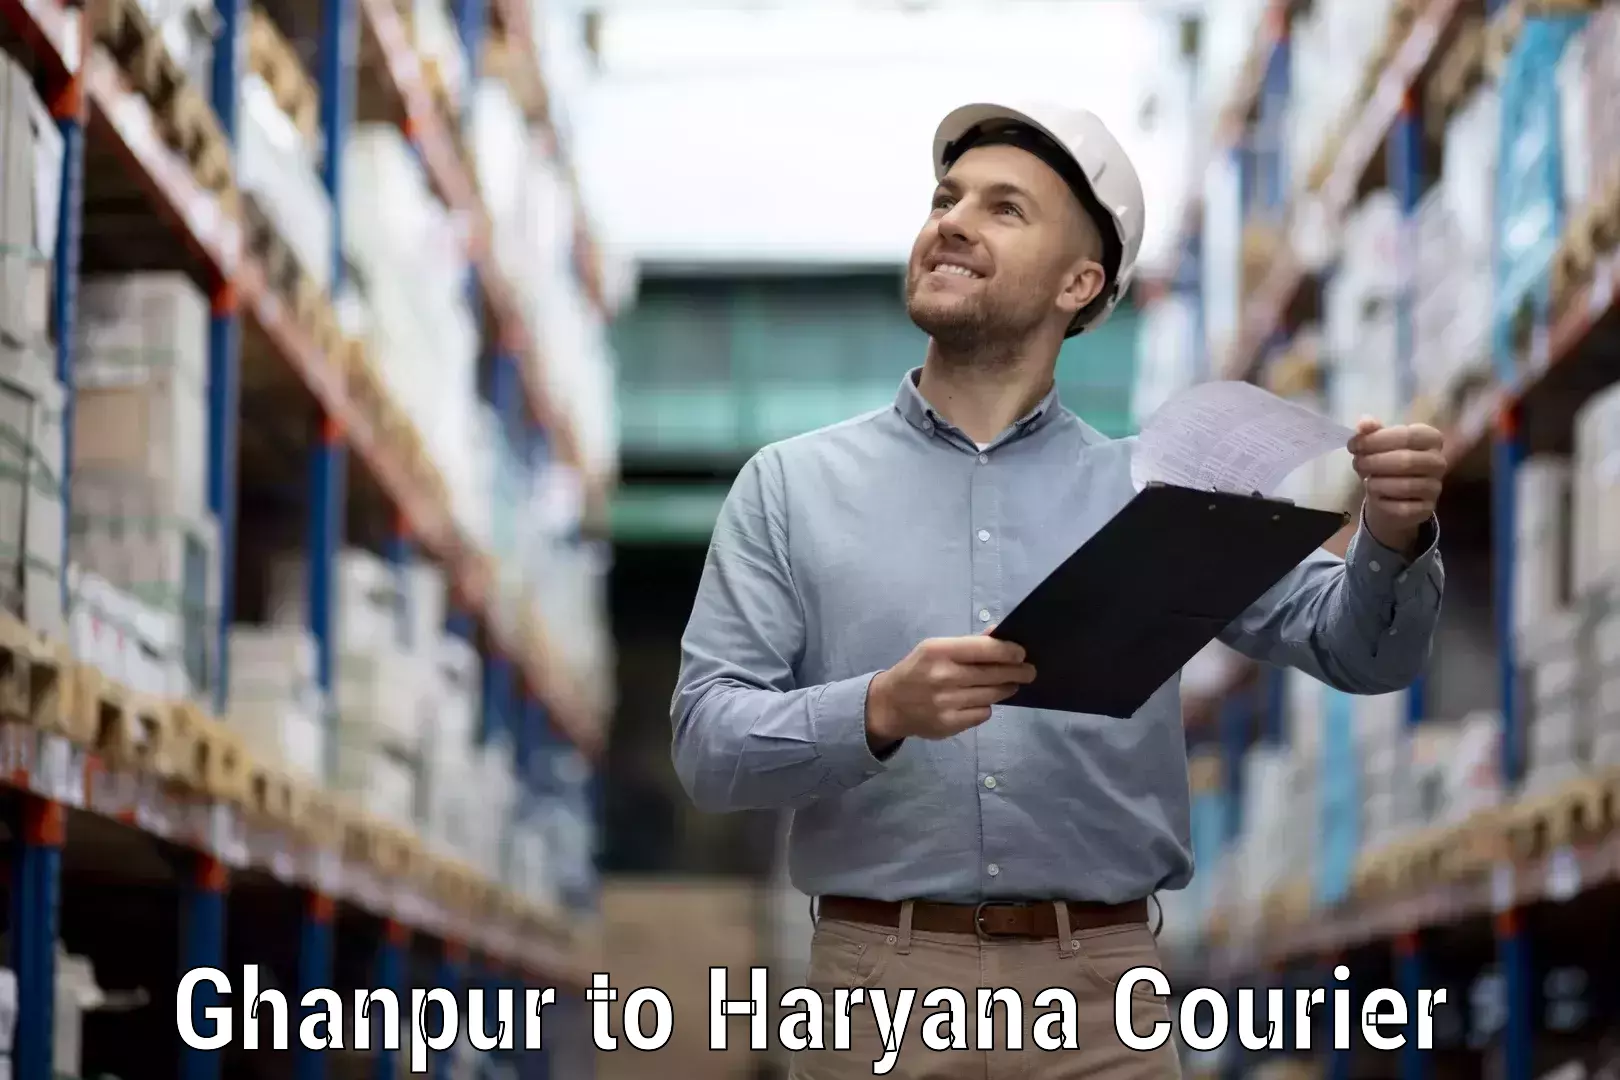 Small business couriers Ghanpur to Fatehabad